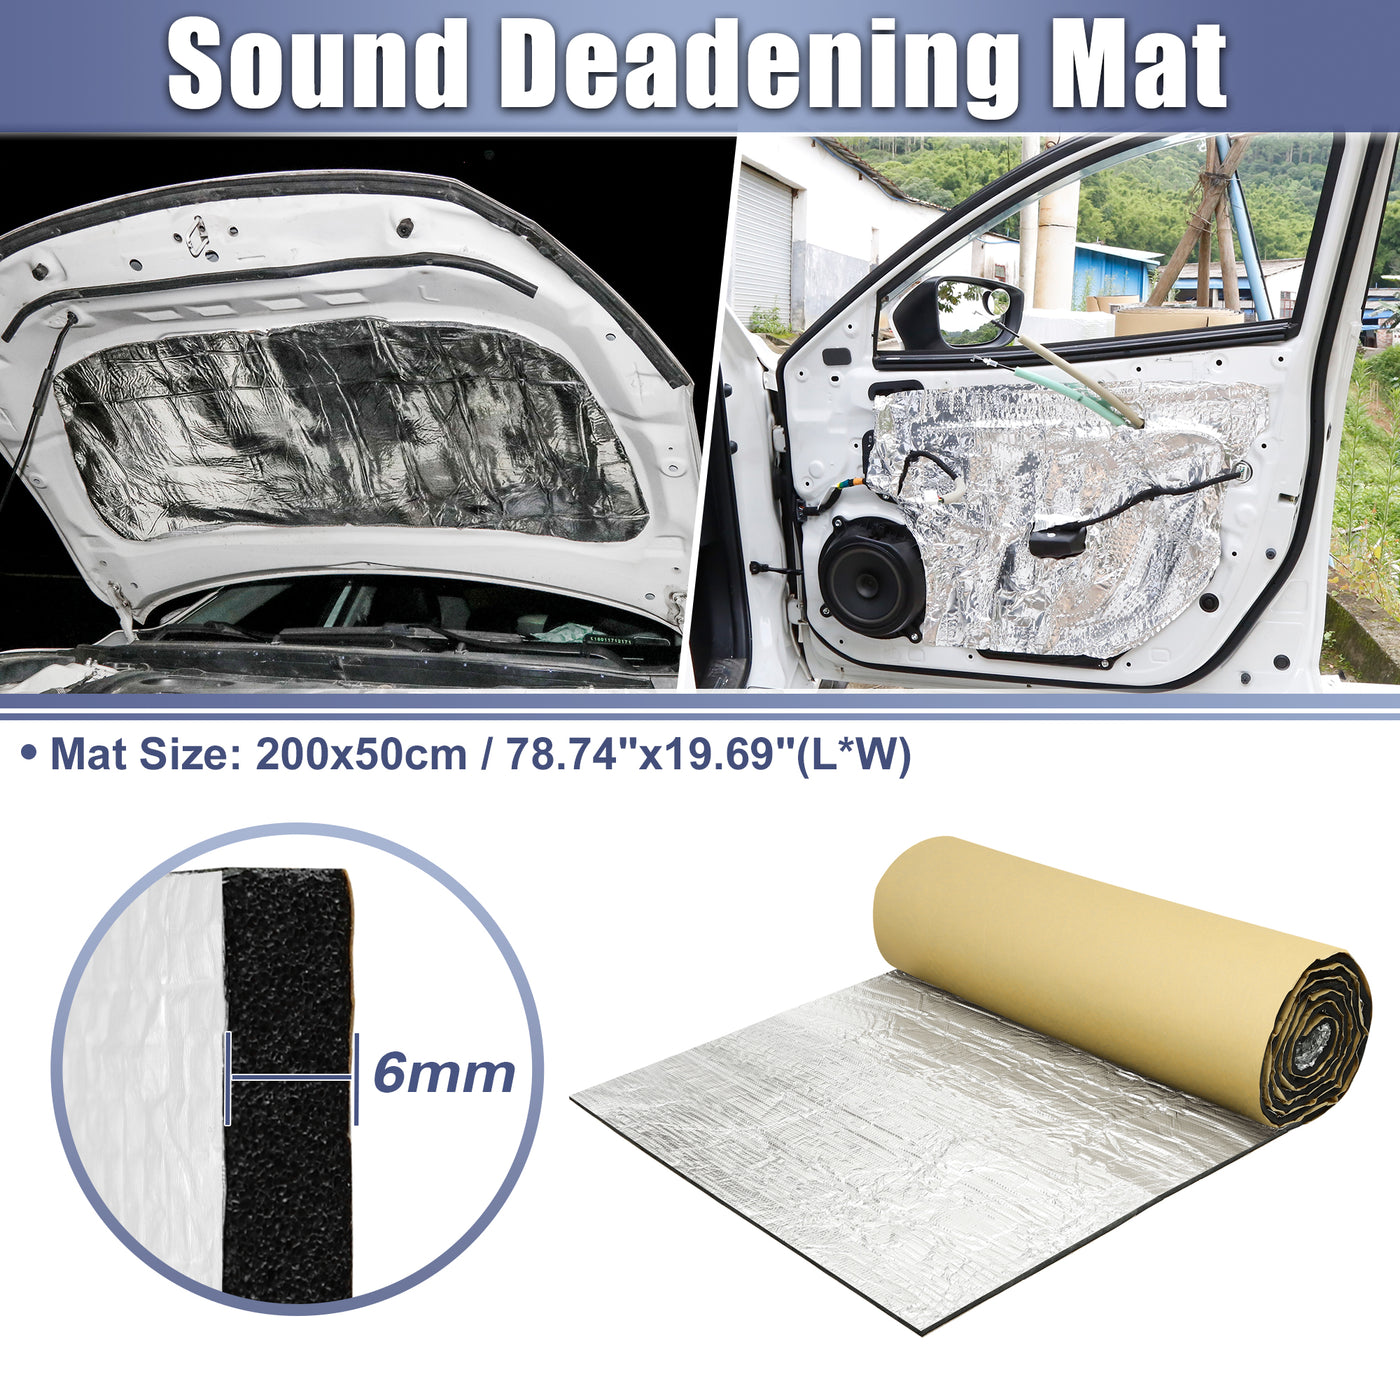 X AUTOHAUX 236mil 6mm 10.76sqft Car Sound Deadening Mat Aluminum Closed Cell Foam Heat Shield Material Damping Self Adhesive Universal for Hood Fender and Boat Engine Cover 78.74"x19.69"